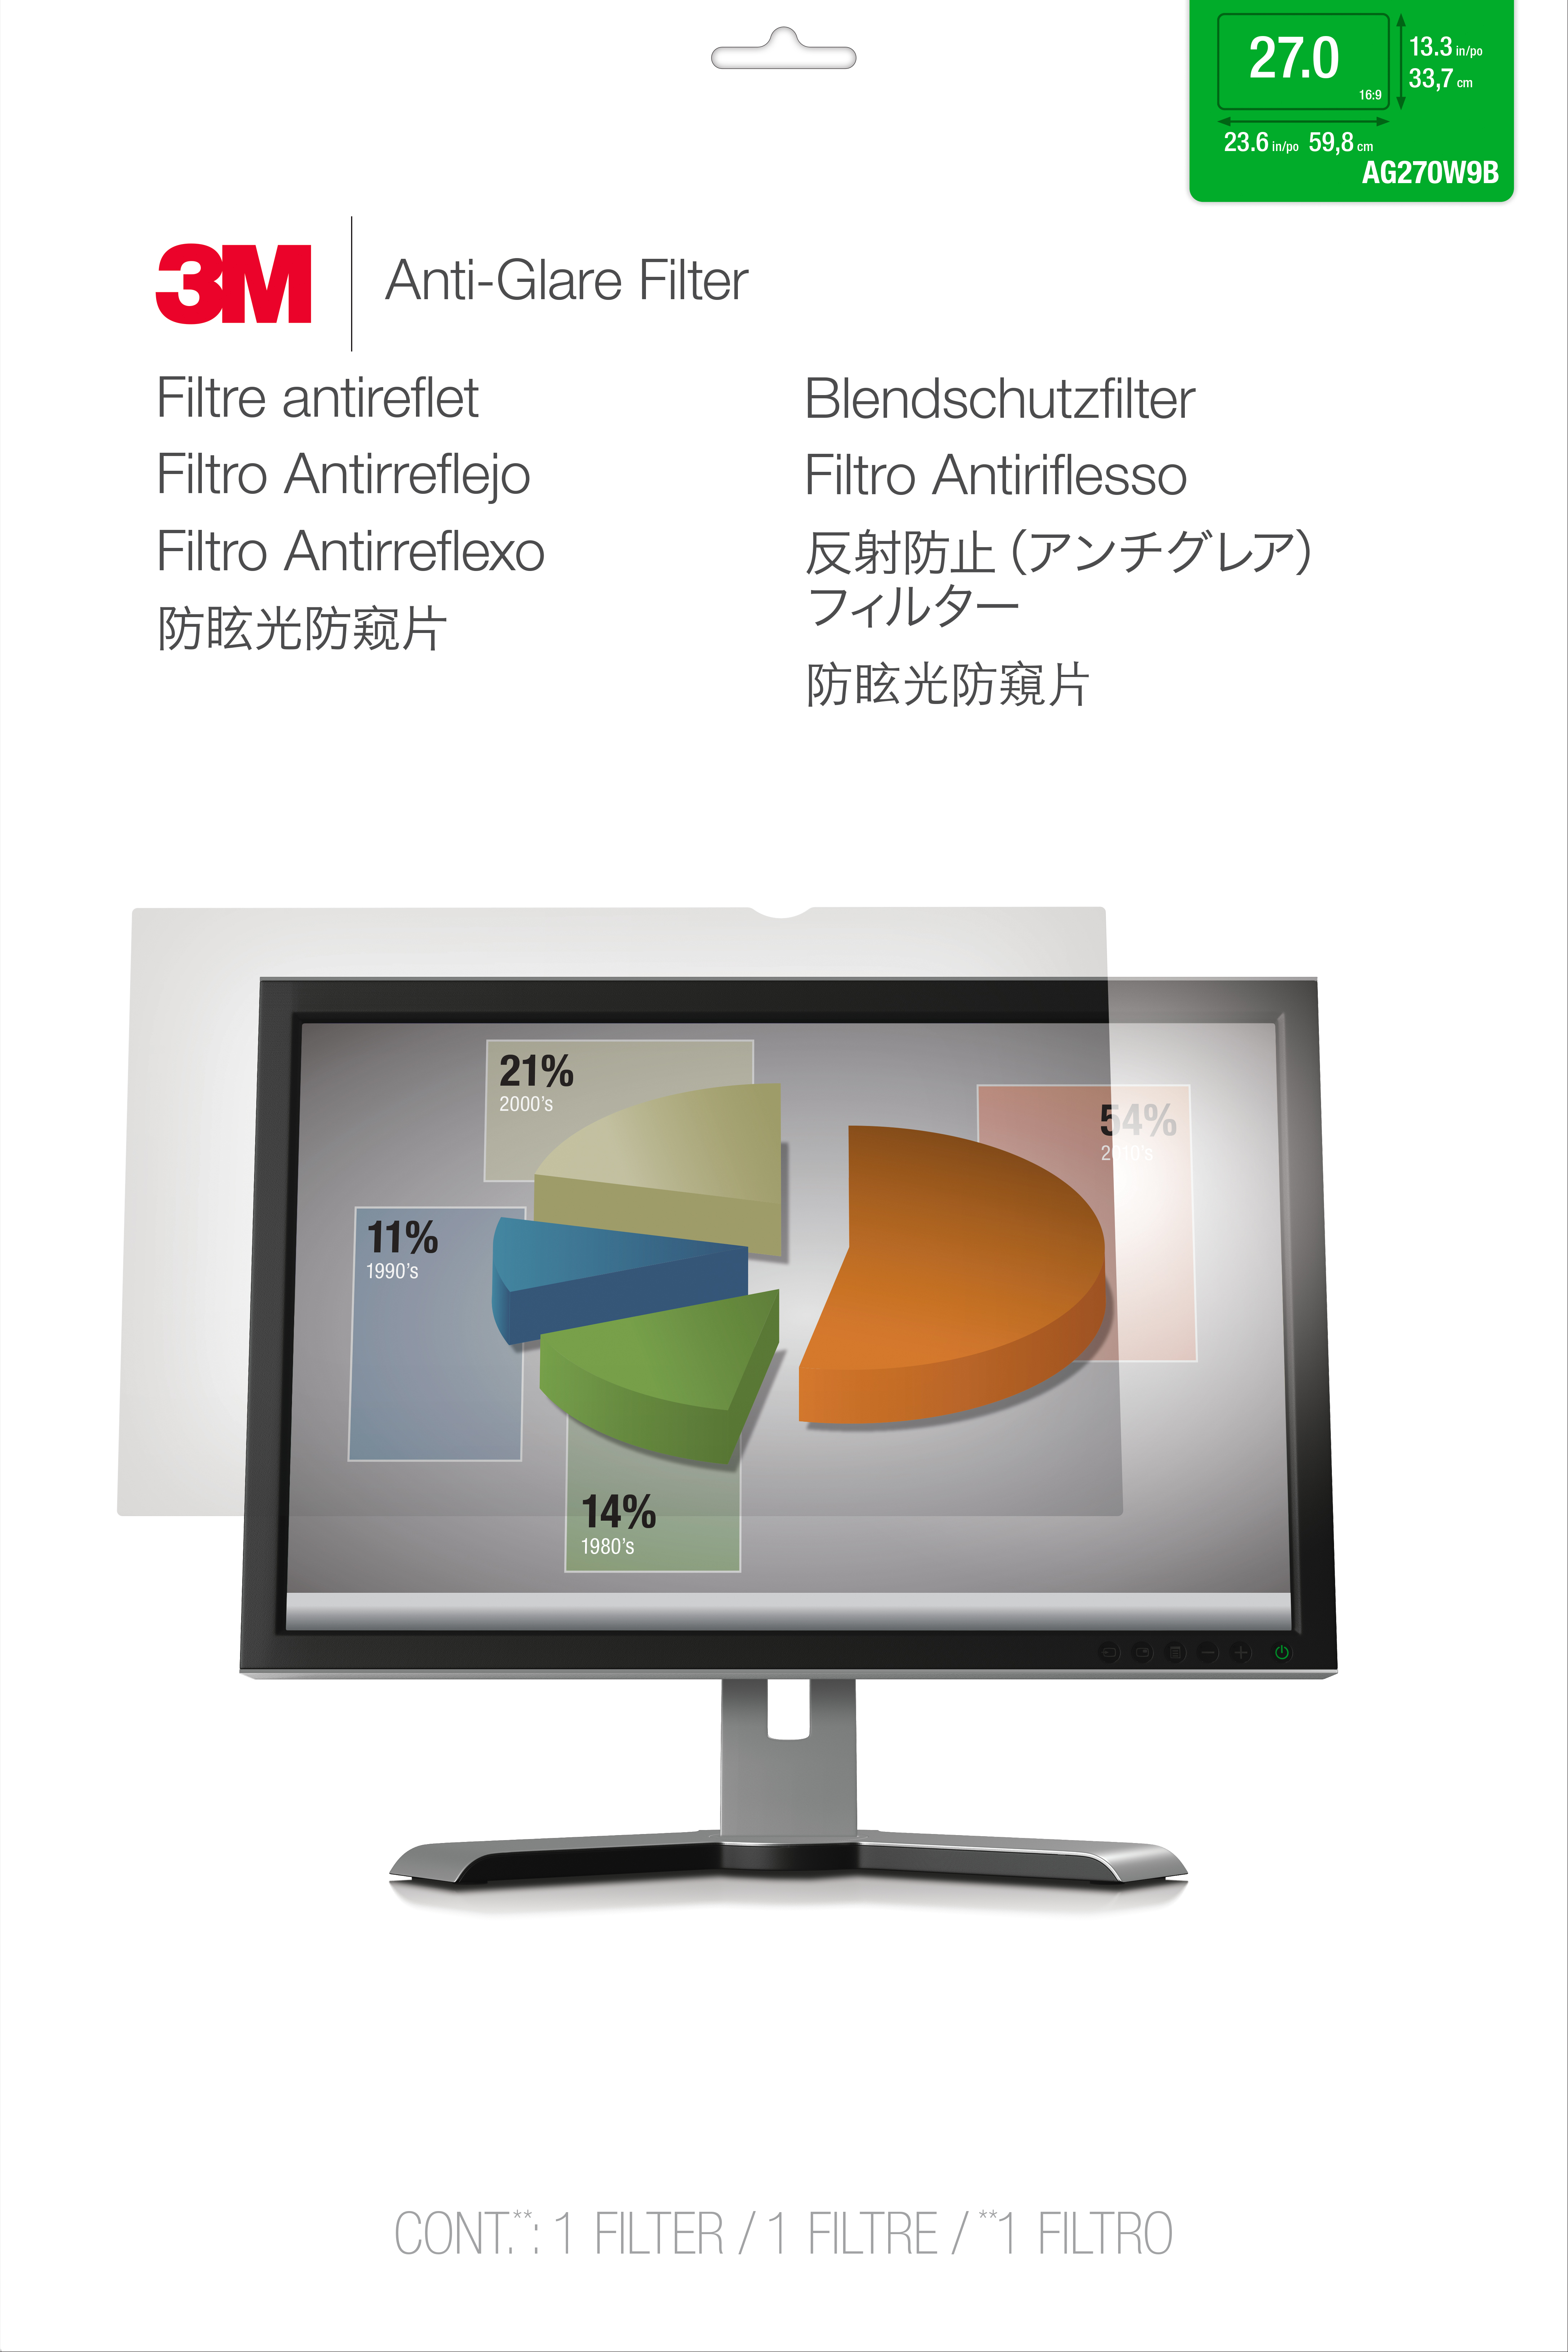 3M Anti-Glare Filter For 27" Monitors 16:9 - Display Anti-glare Filter - 27" Wide - Clear AG270W9B - C2000